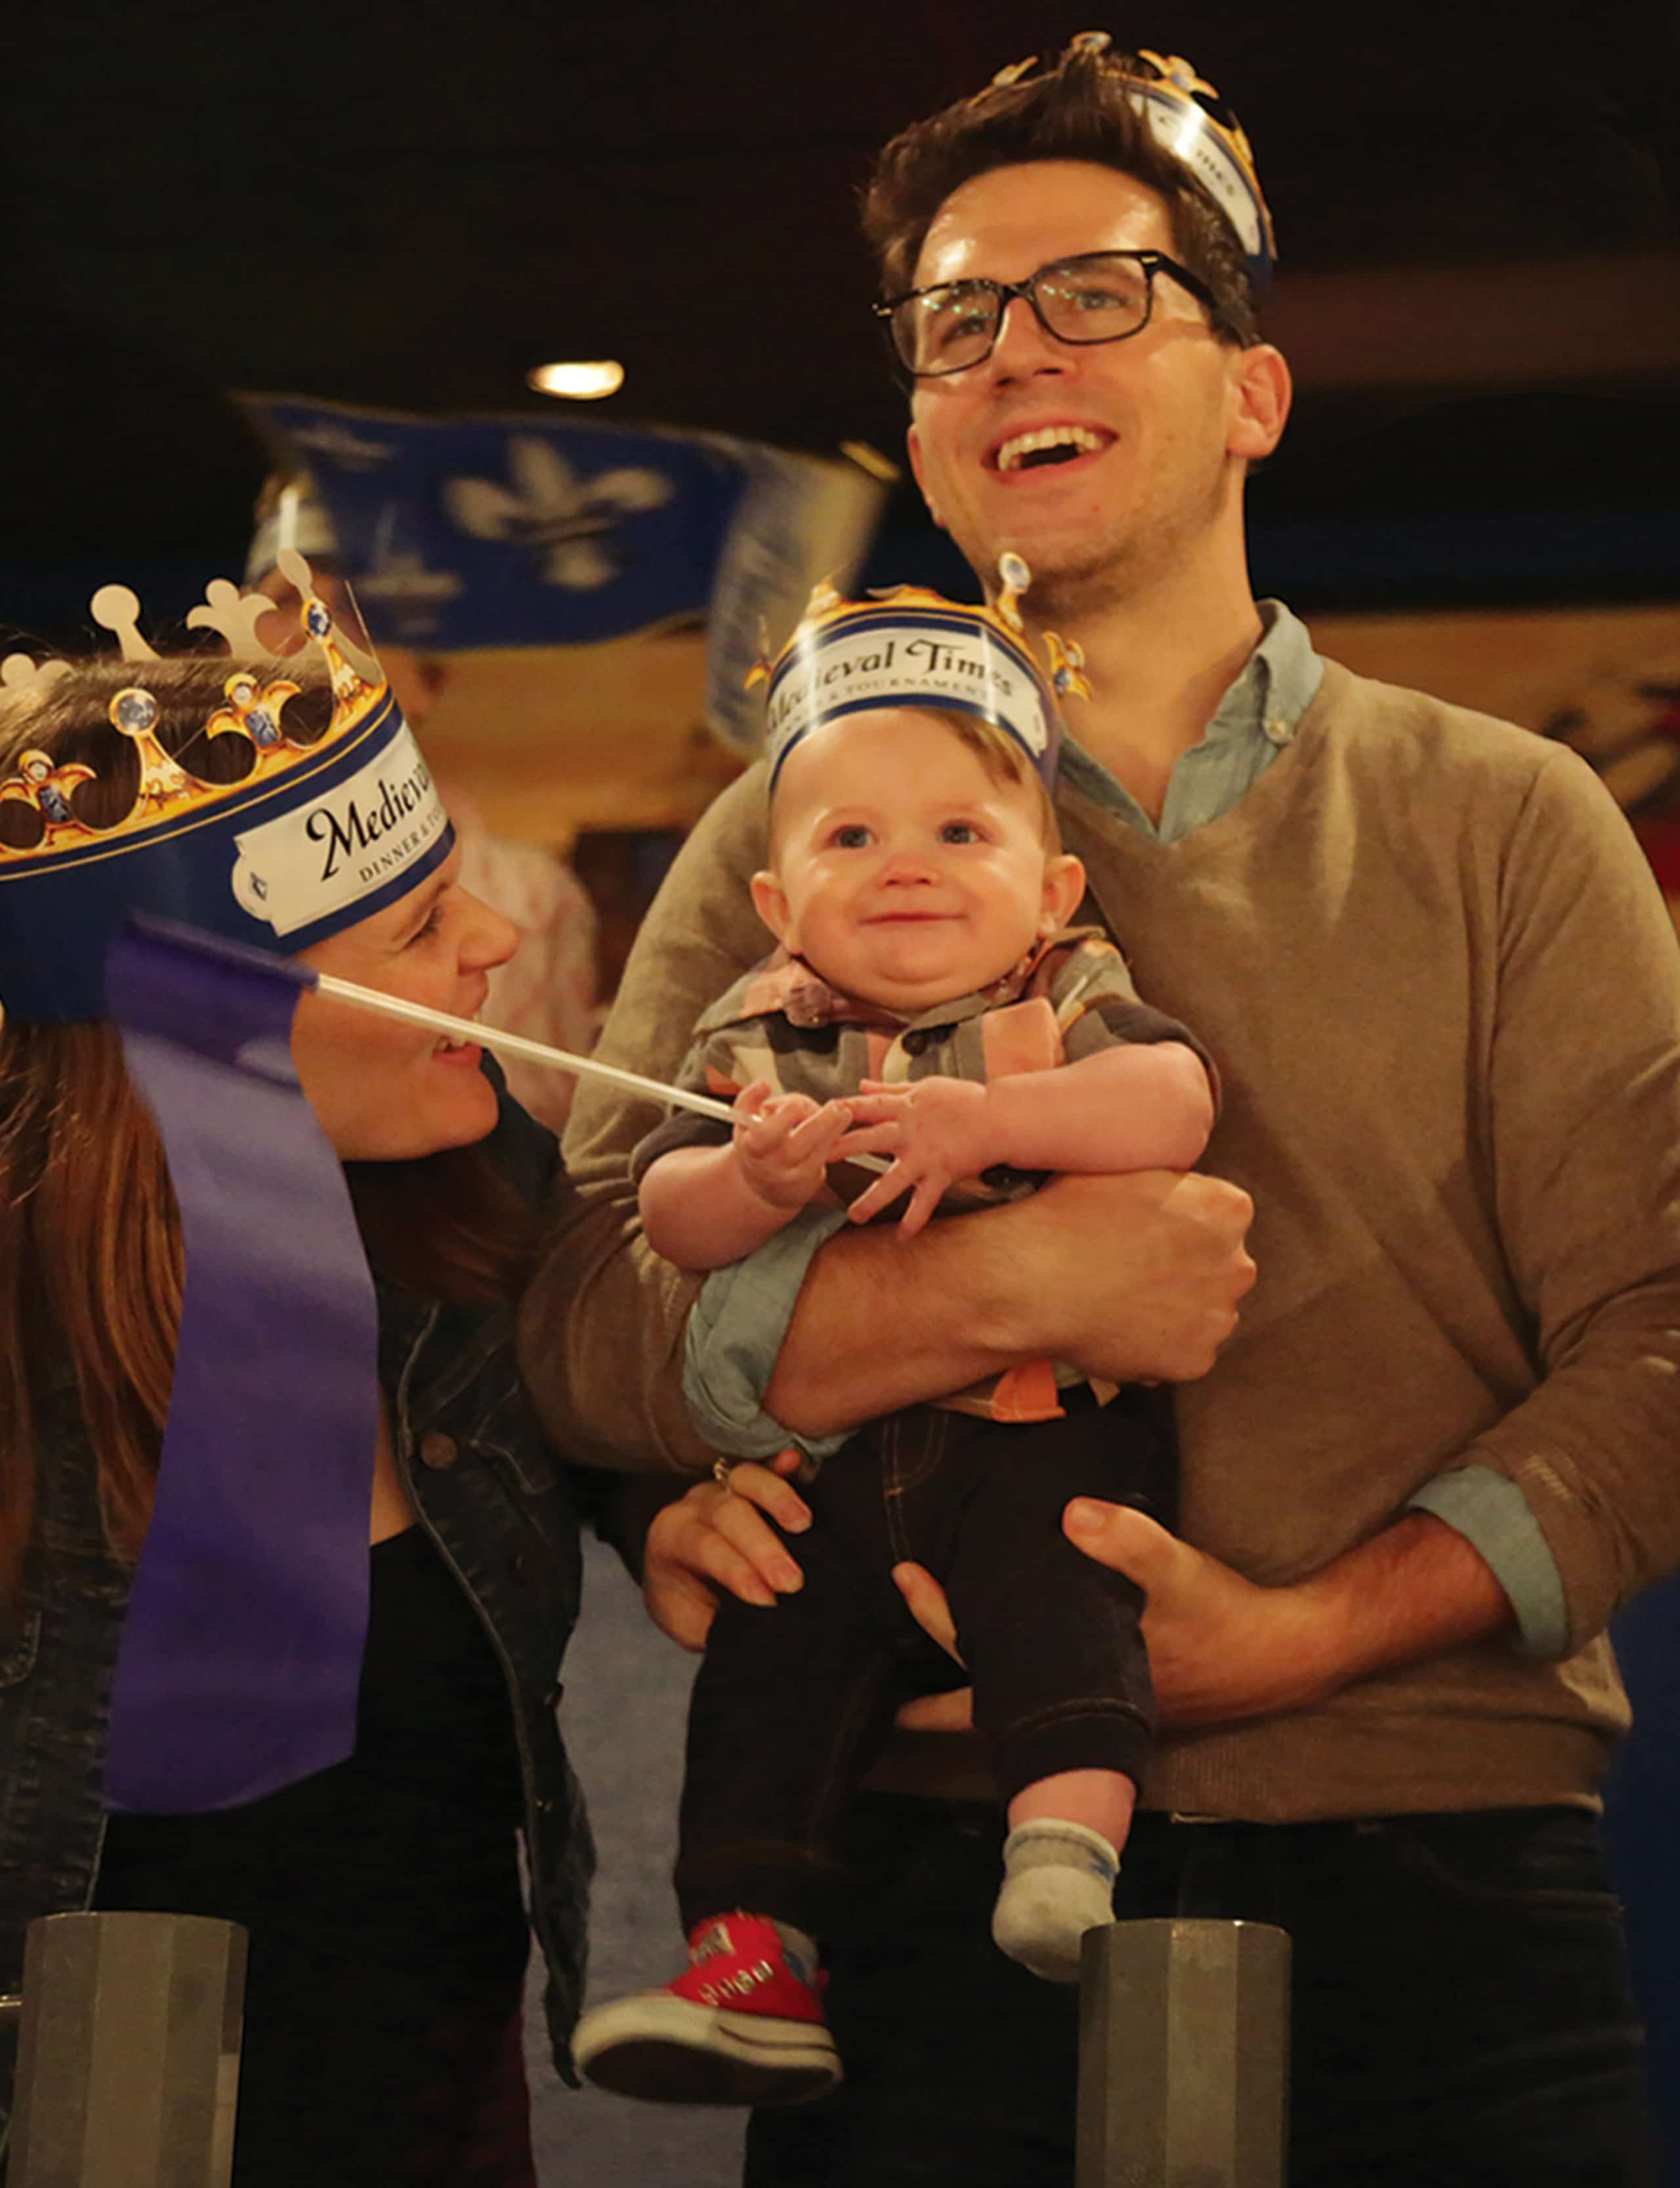 Treat dad like royalty this Father’s Day at Medieval Times! Giveaway: Family 4 Pack to NJ Castle on Father’s Day